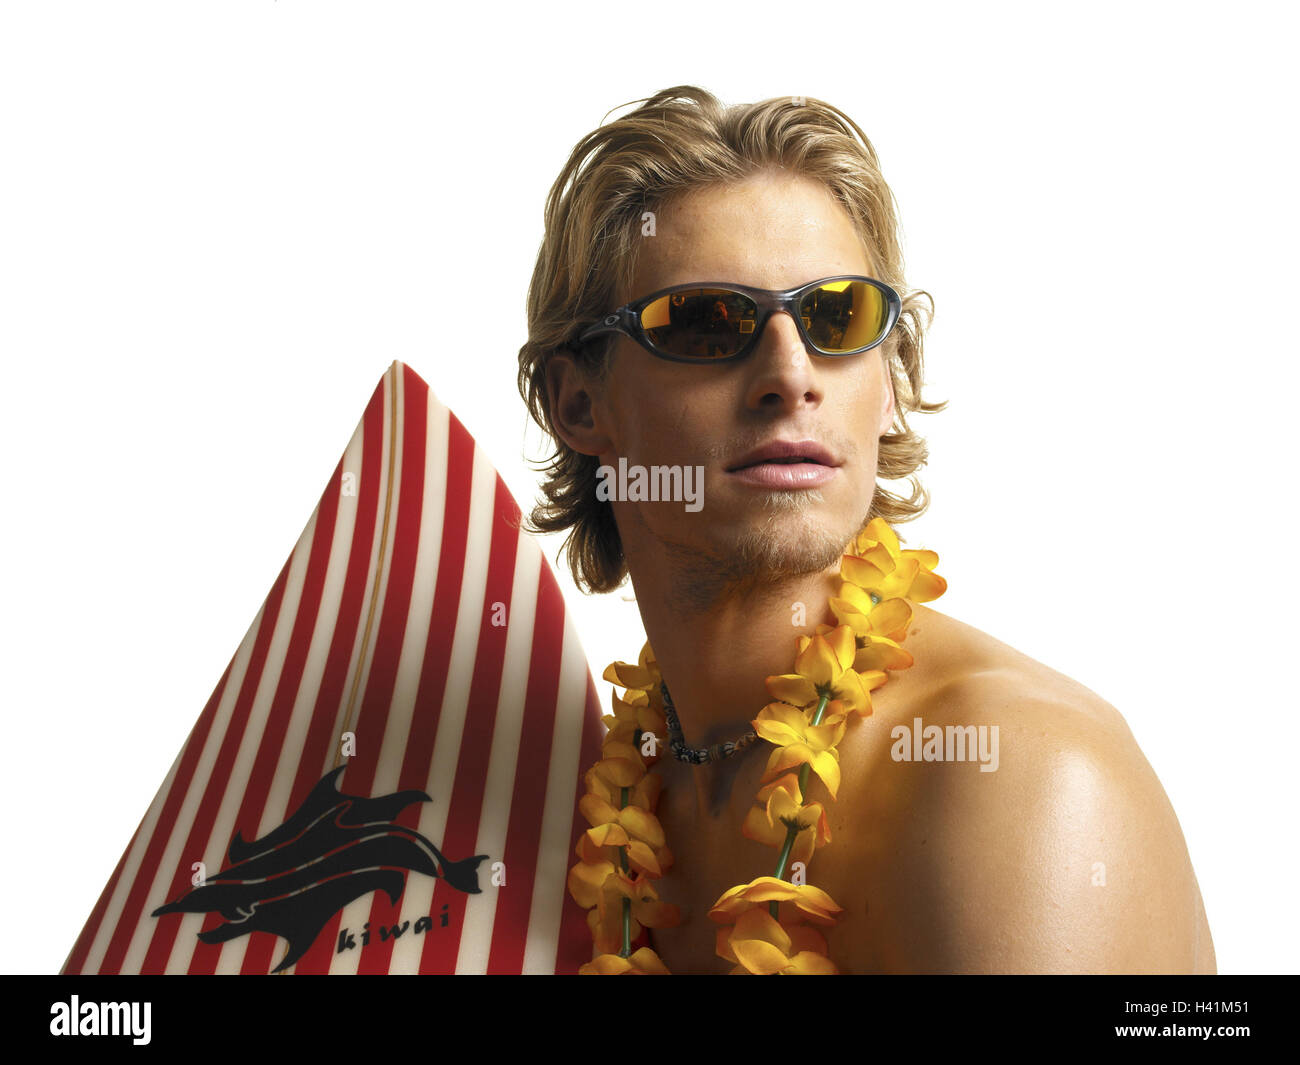 Man, young, sunglasses, floral wreath, surfboard, portrait, icon, vacation, summer vacation, leisure time, rest, sport, water sport, wave bleed, surfer, blond, necklace, free upper part of the body, glasses, side glance, view side view, flower rim artific Stock Photo